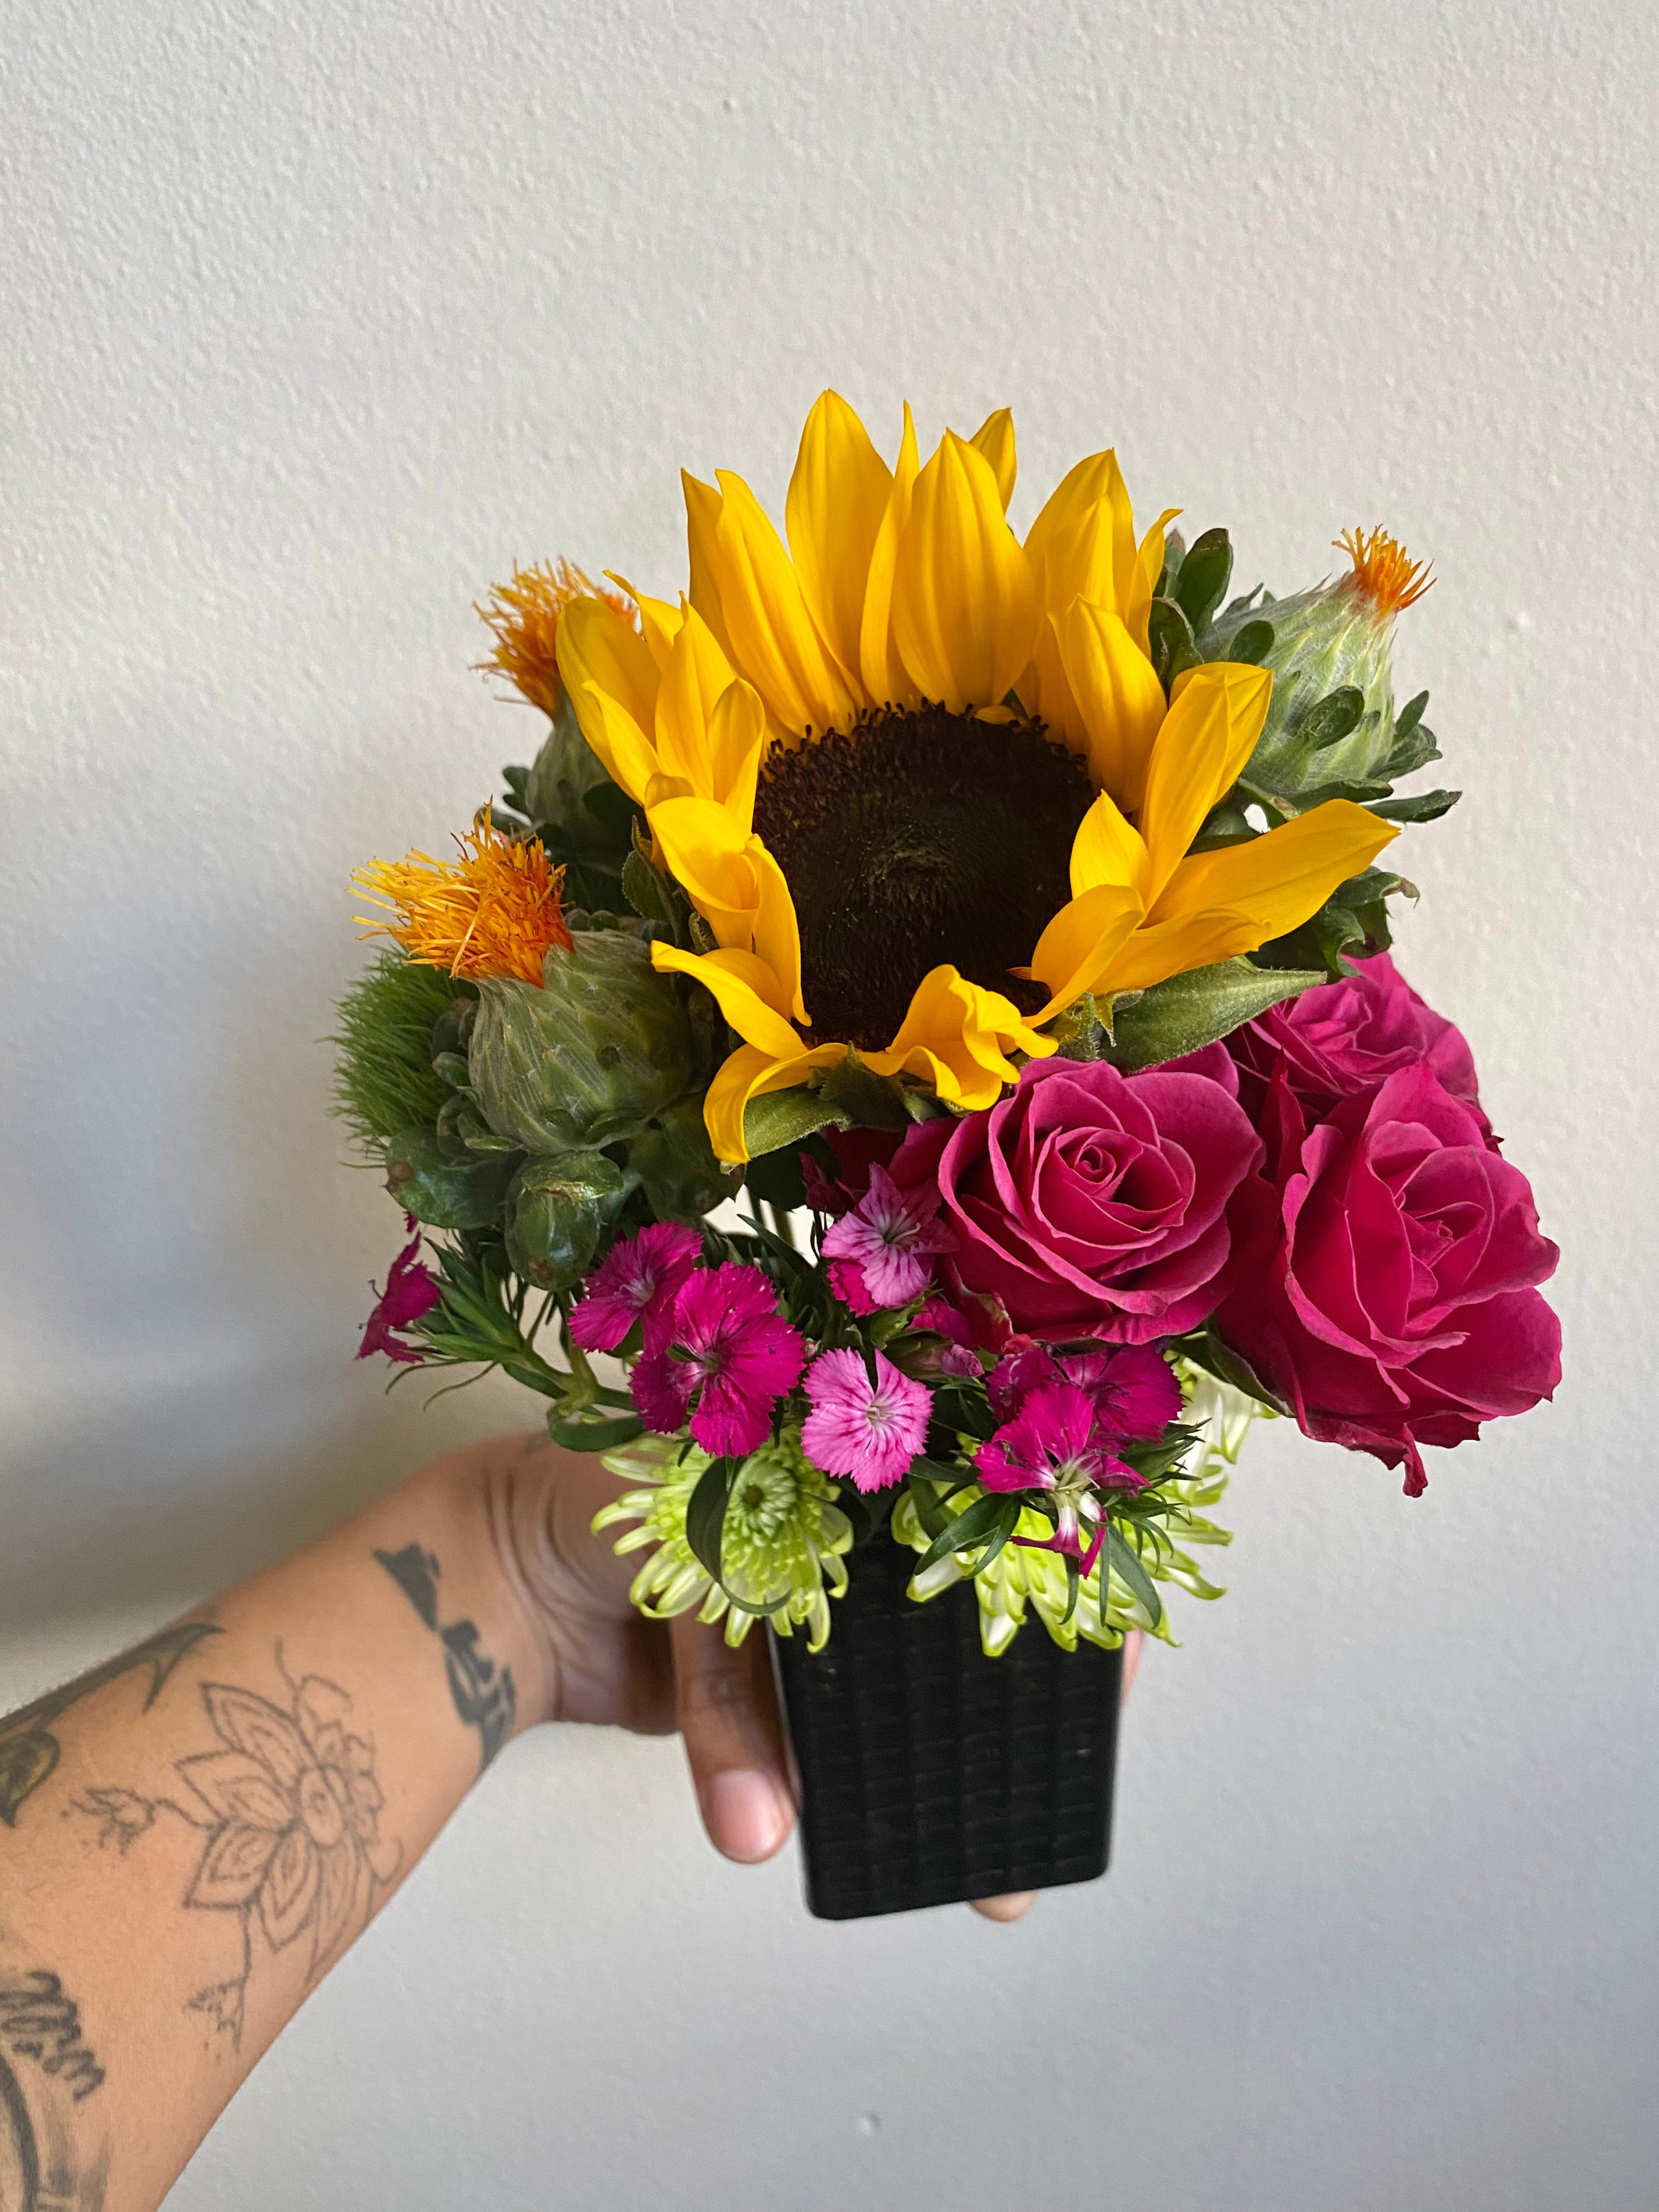 model&#x27;s hand holding an arrangement with pink roses, sunflowers, and more